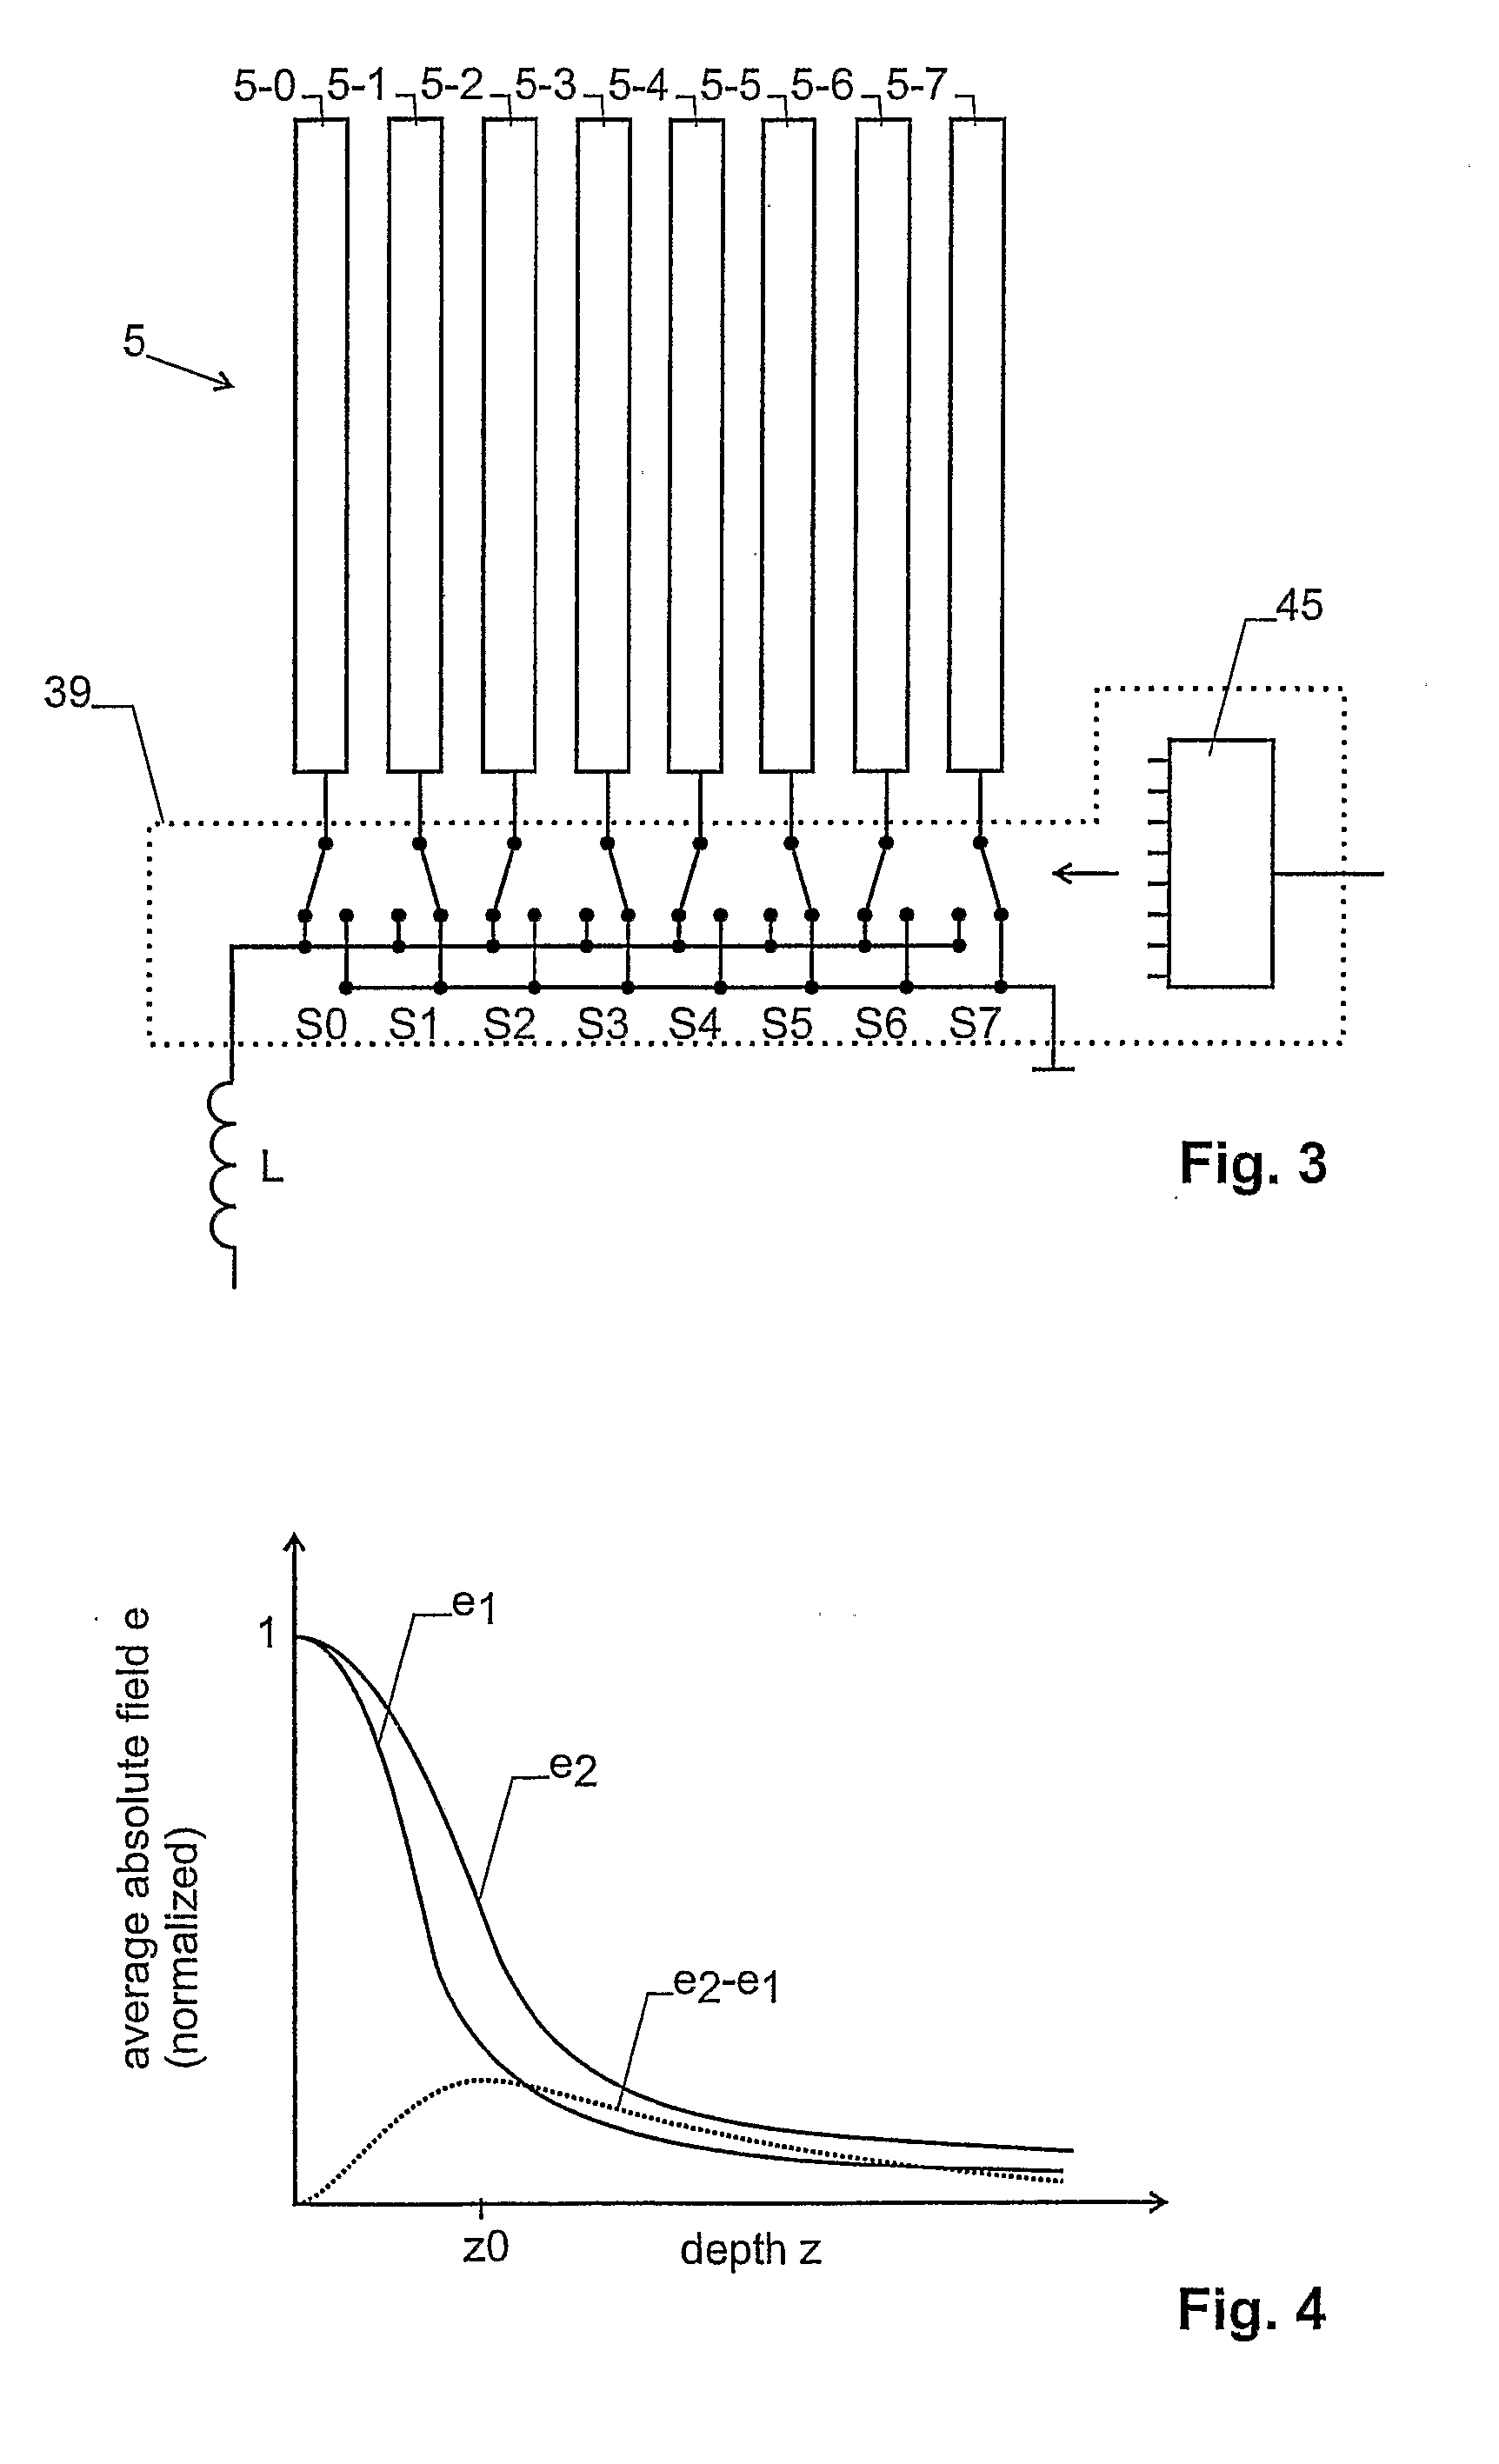 Method and Device for Determining a Parameter of Living Tissue